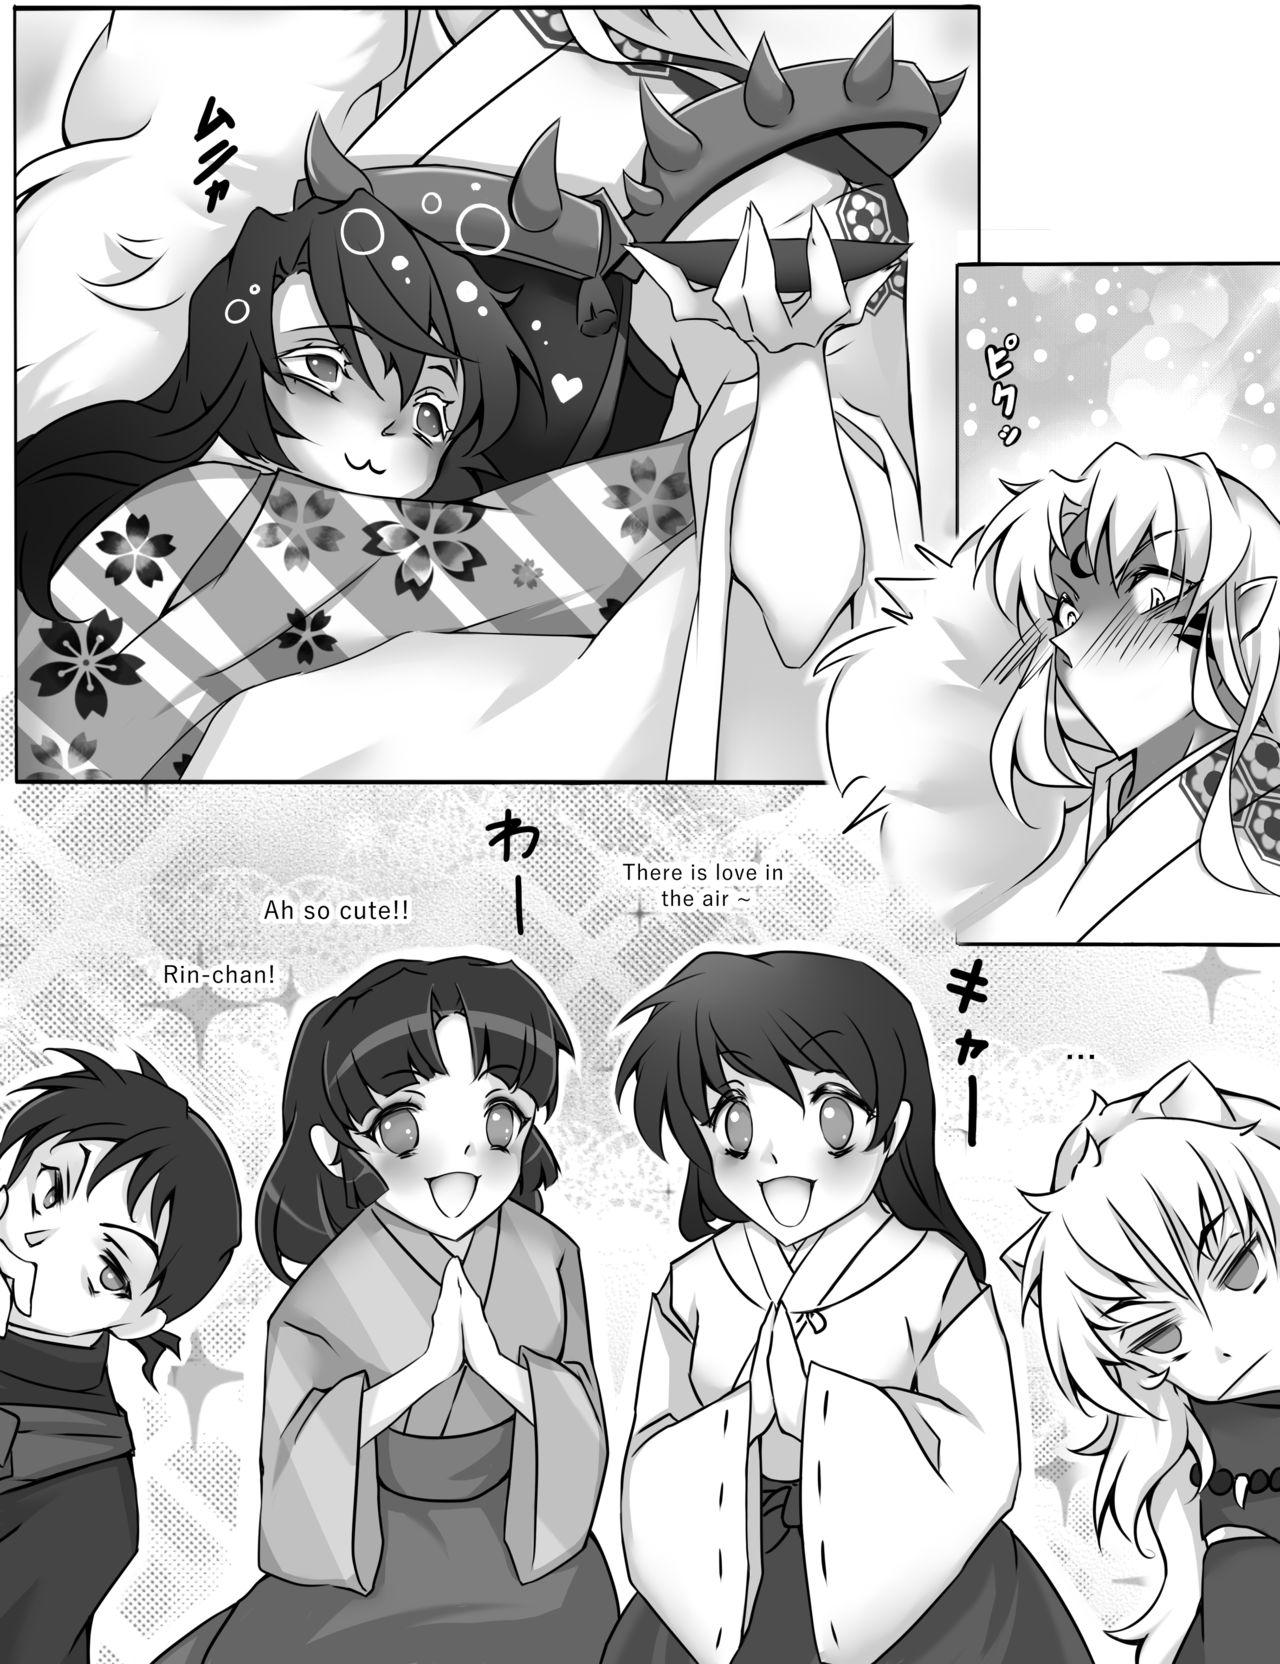 Sapphicerotica A fun night - Inuyasha Stepdaughter - Page 6